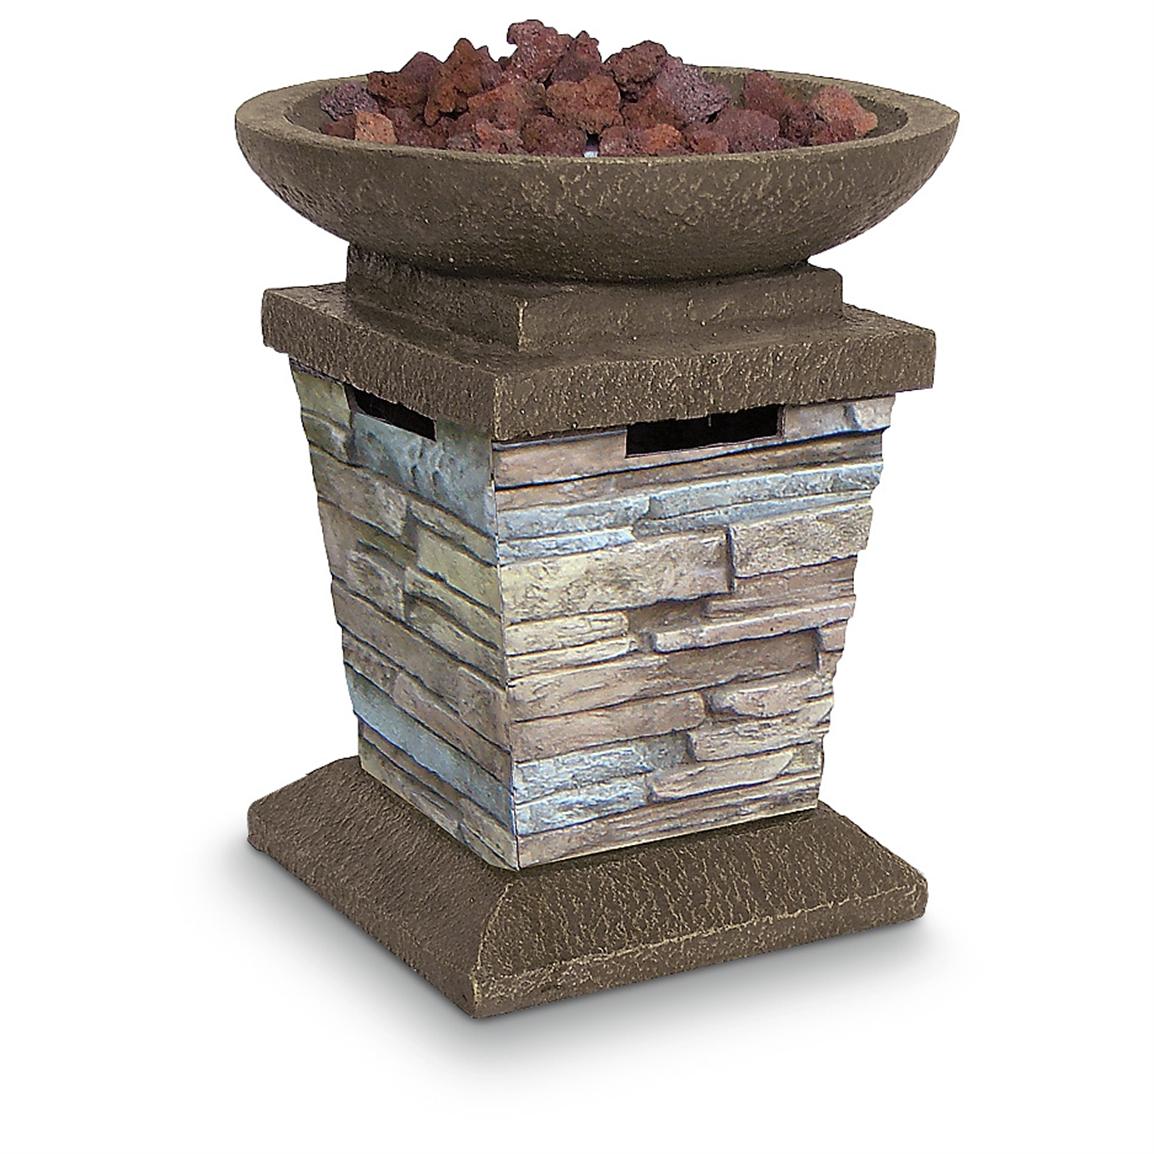 Bond Manufacturing Newcastle Tabletop Outdoor Propane Heater